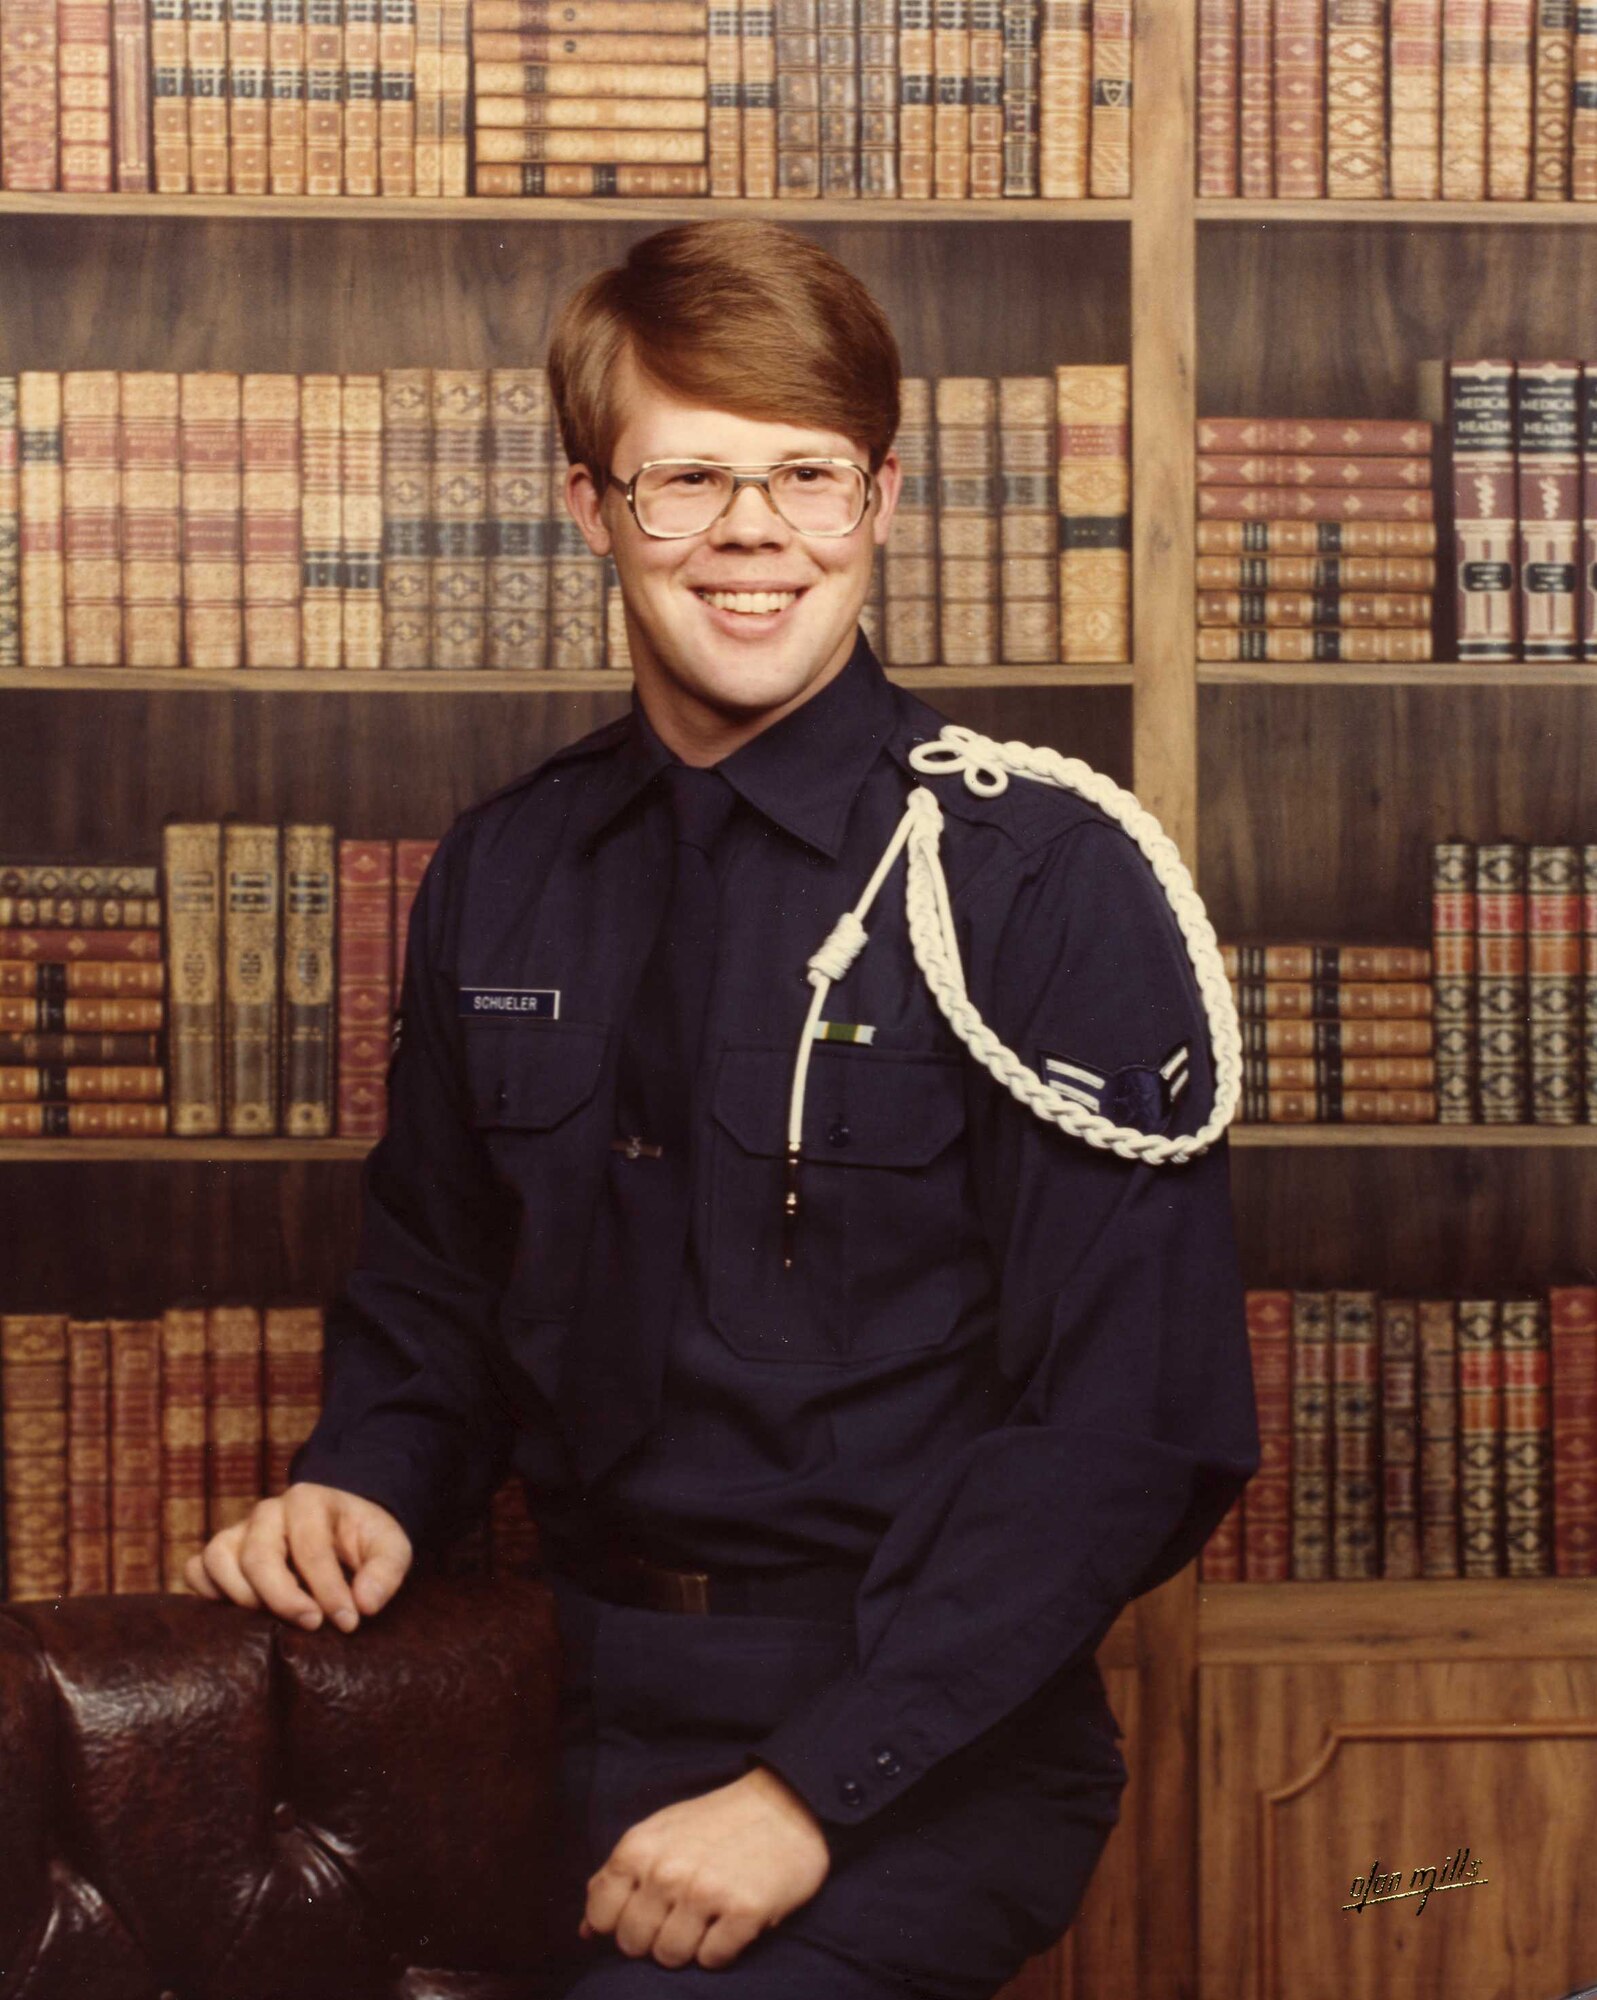 At his first duty station, Charleston Air Force Base in South Carolina, then-Airman 1st Class Kirby Schueler poses for a photo to send to family and friends circa 1977. (Courtesy photo)